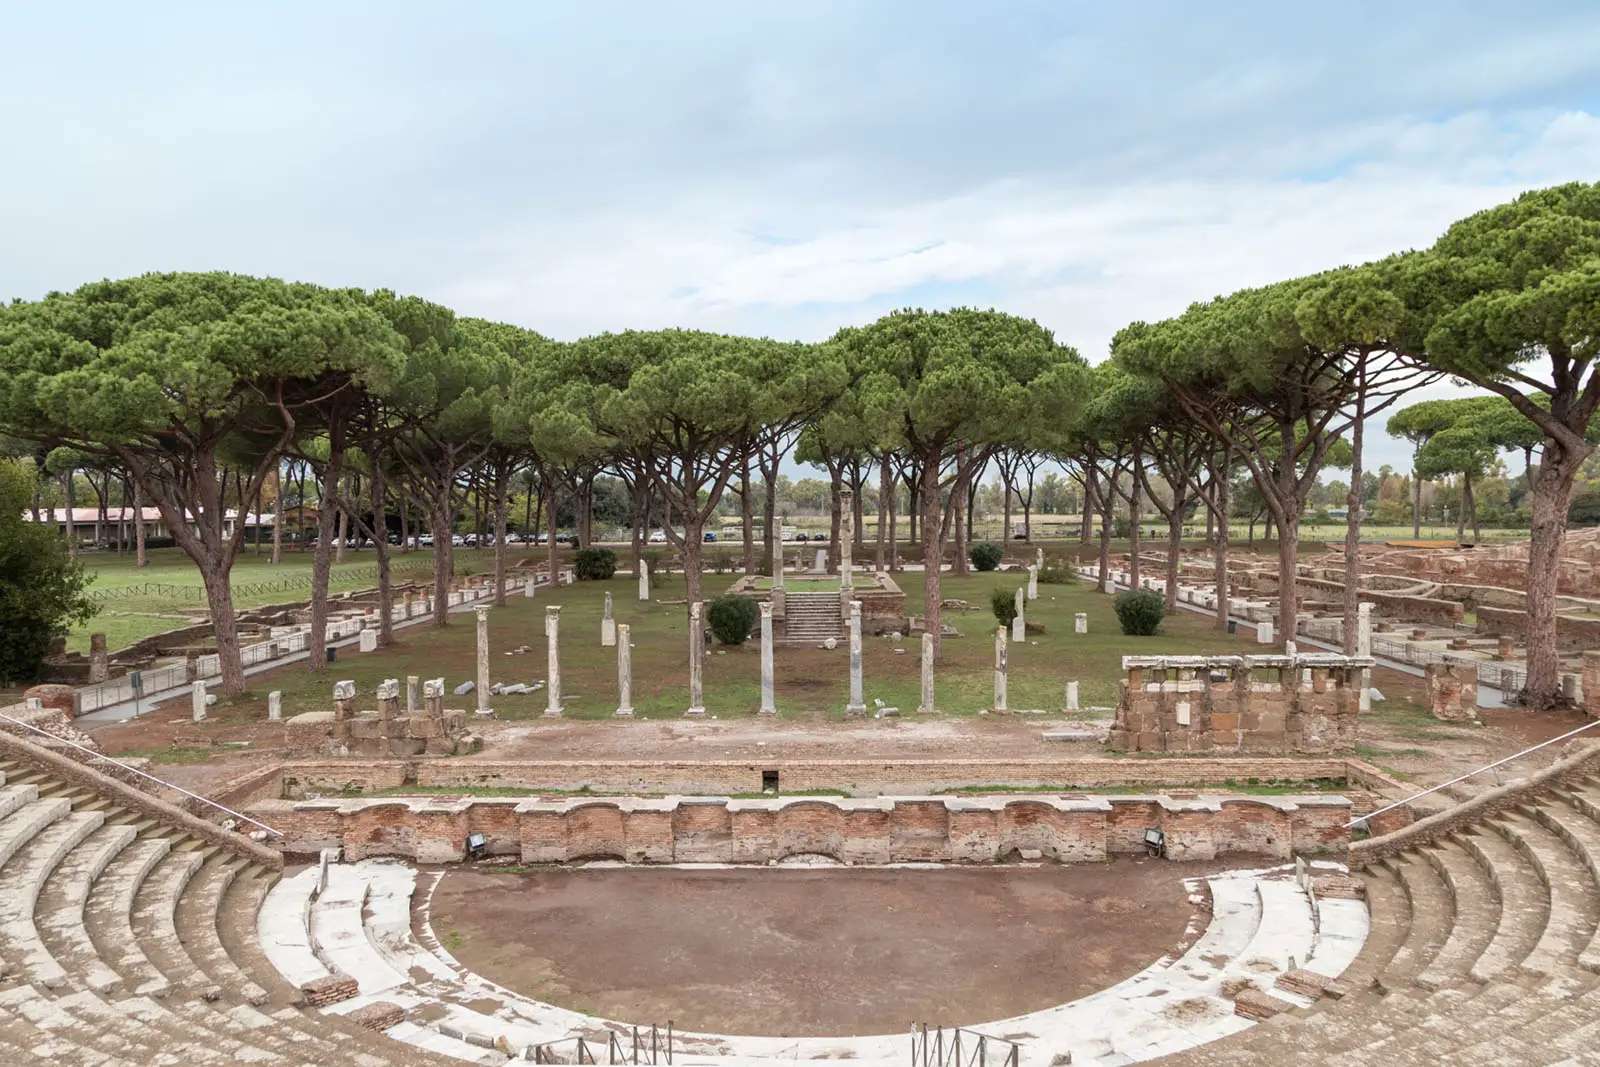 Ostia Antica: A Fascinating Look at the Ancient Harbor City of Rome